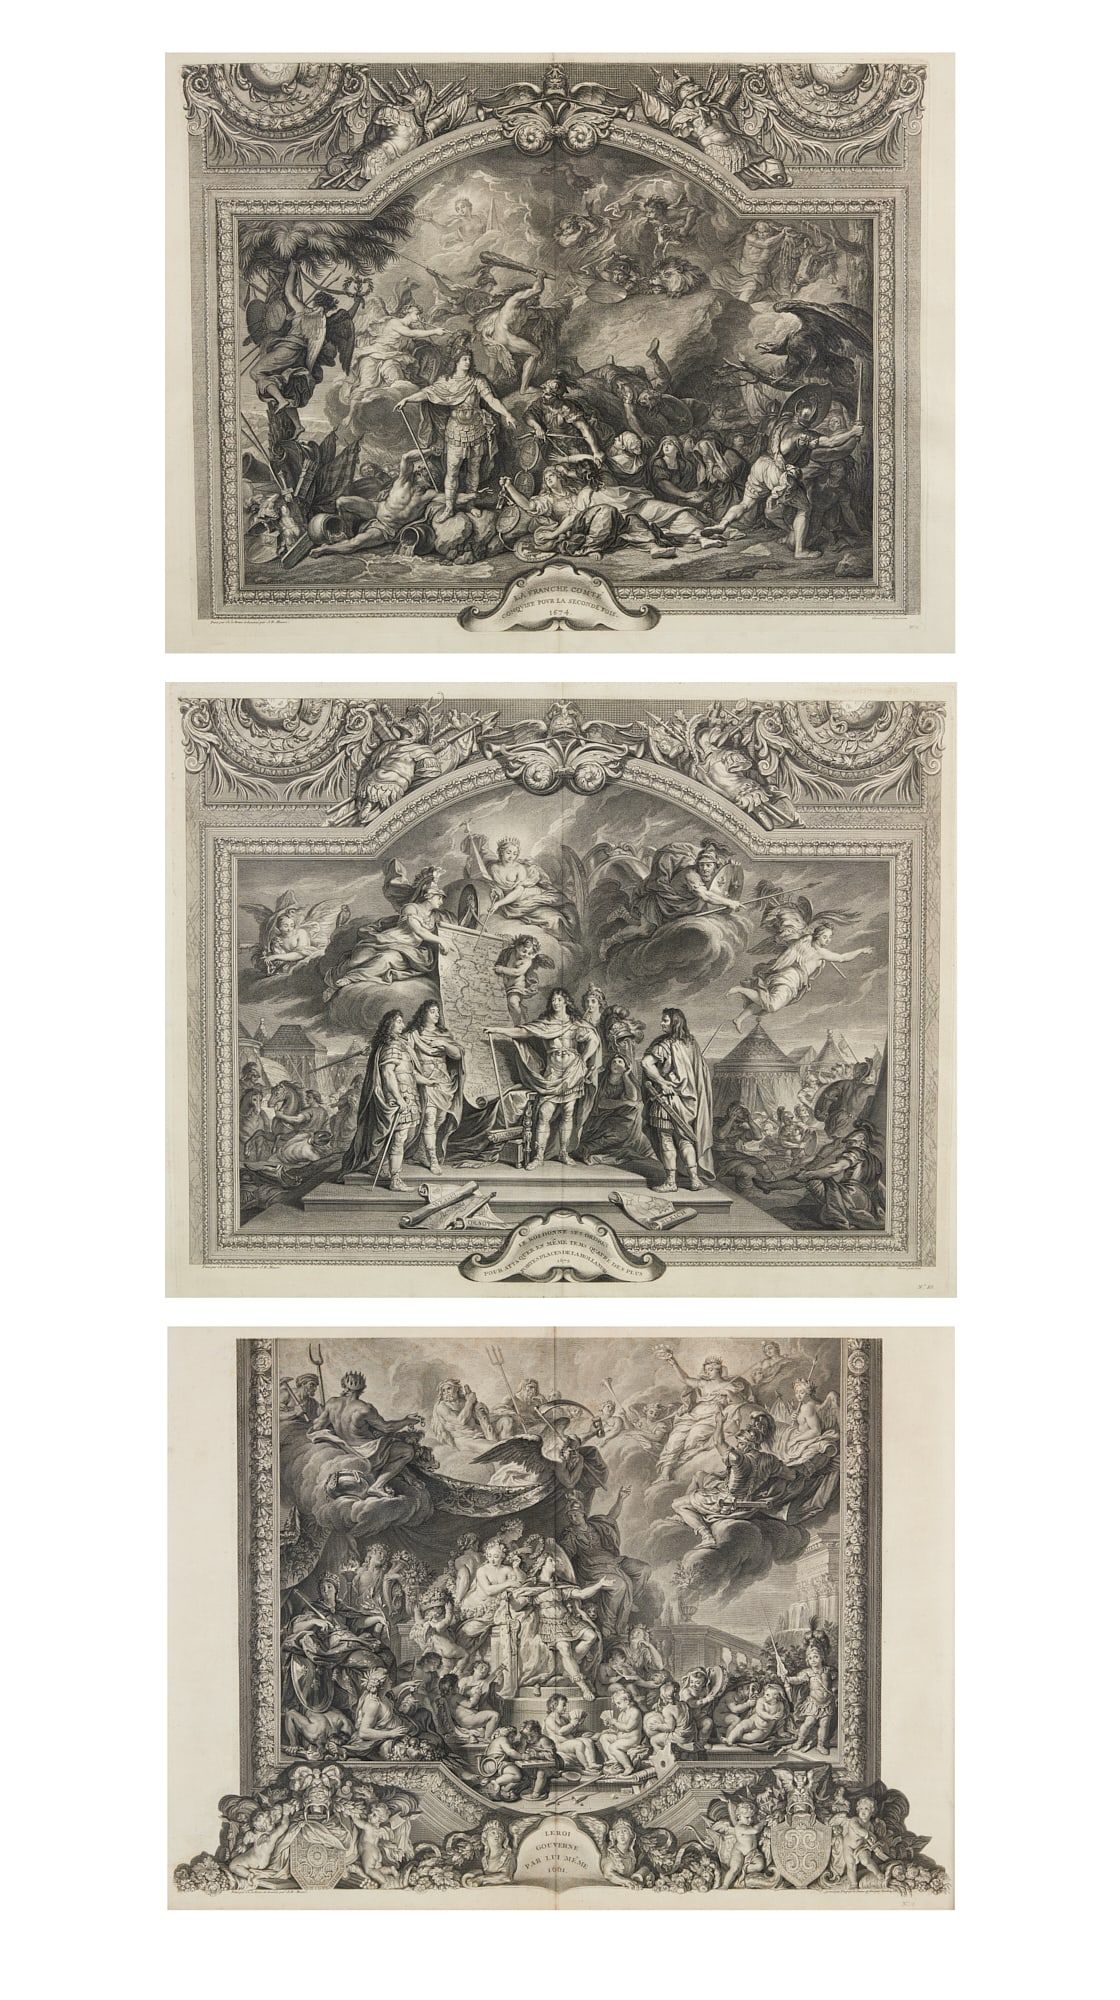 AFTER CHARLES LE BRUN, PALACE OF